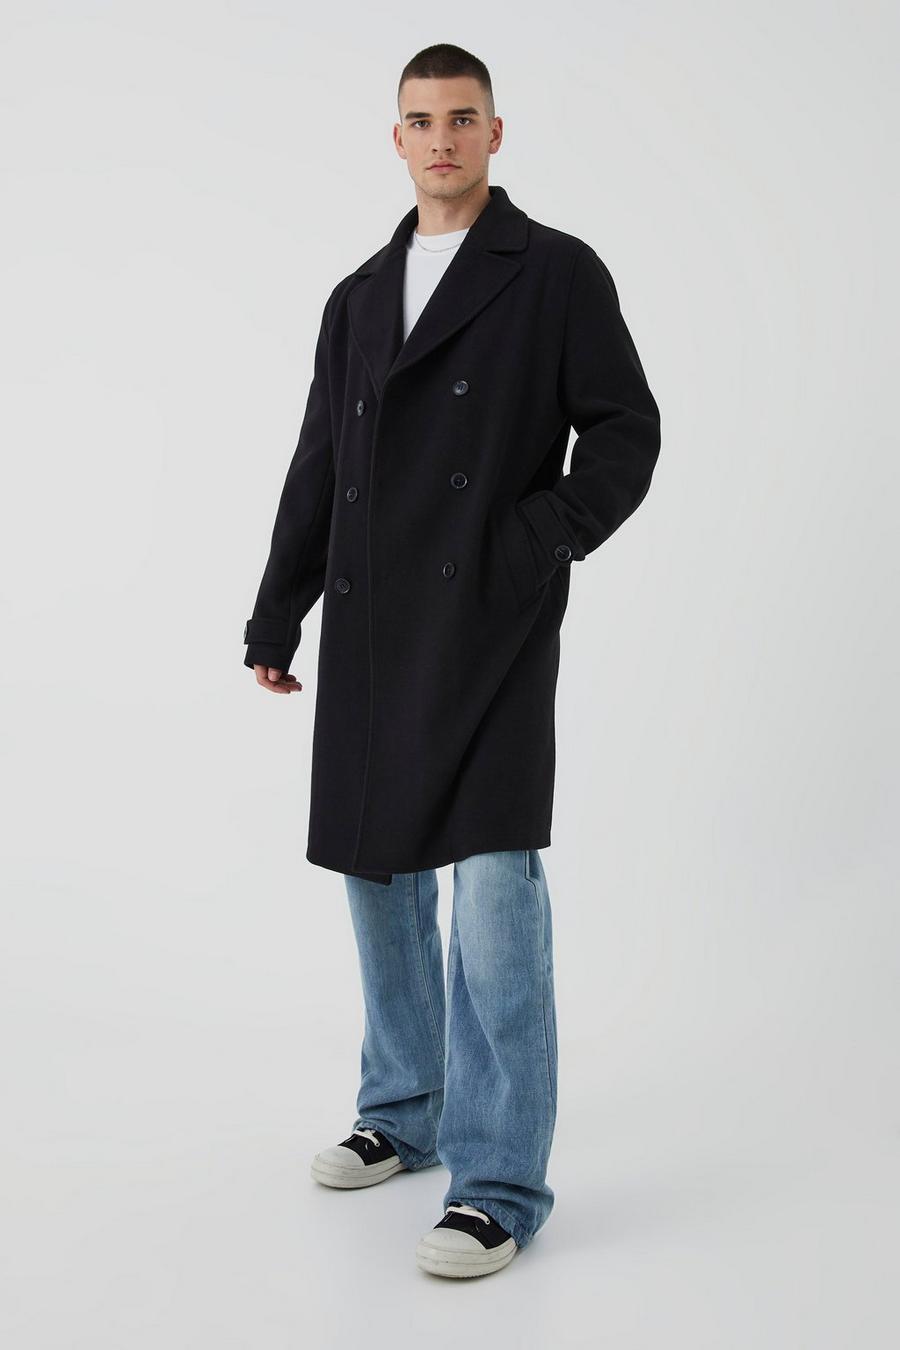 Black nero Tall Double Breasted Wool Look Overcoat